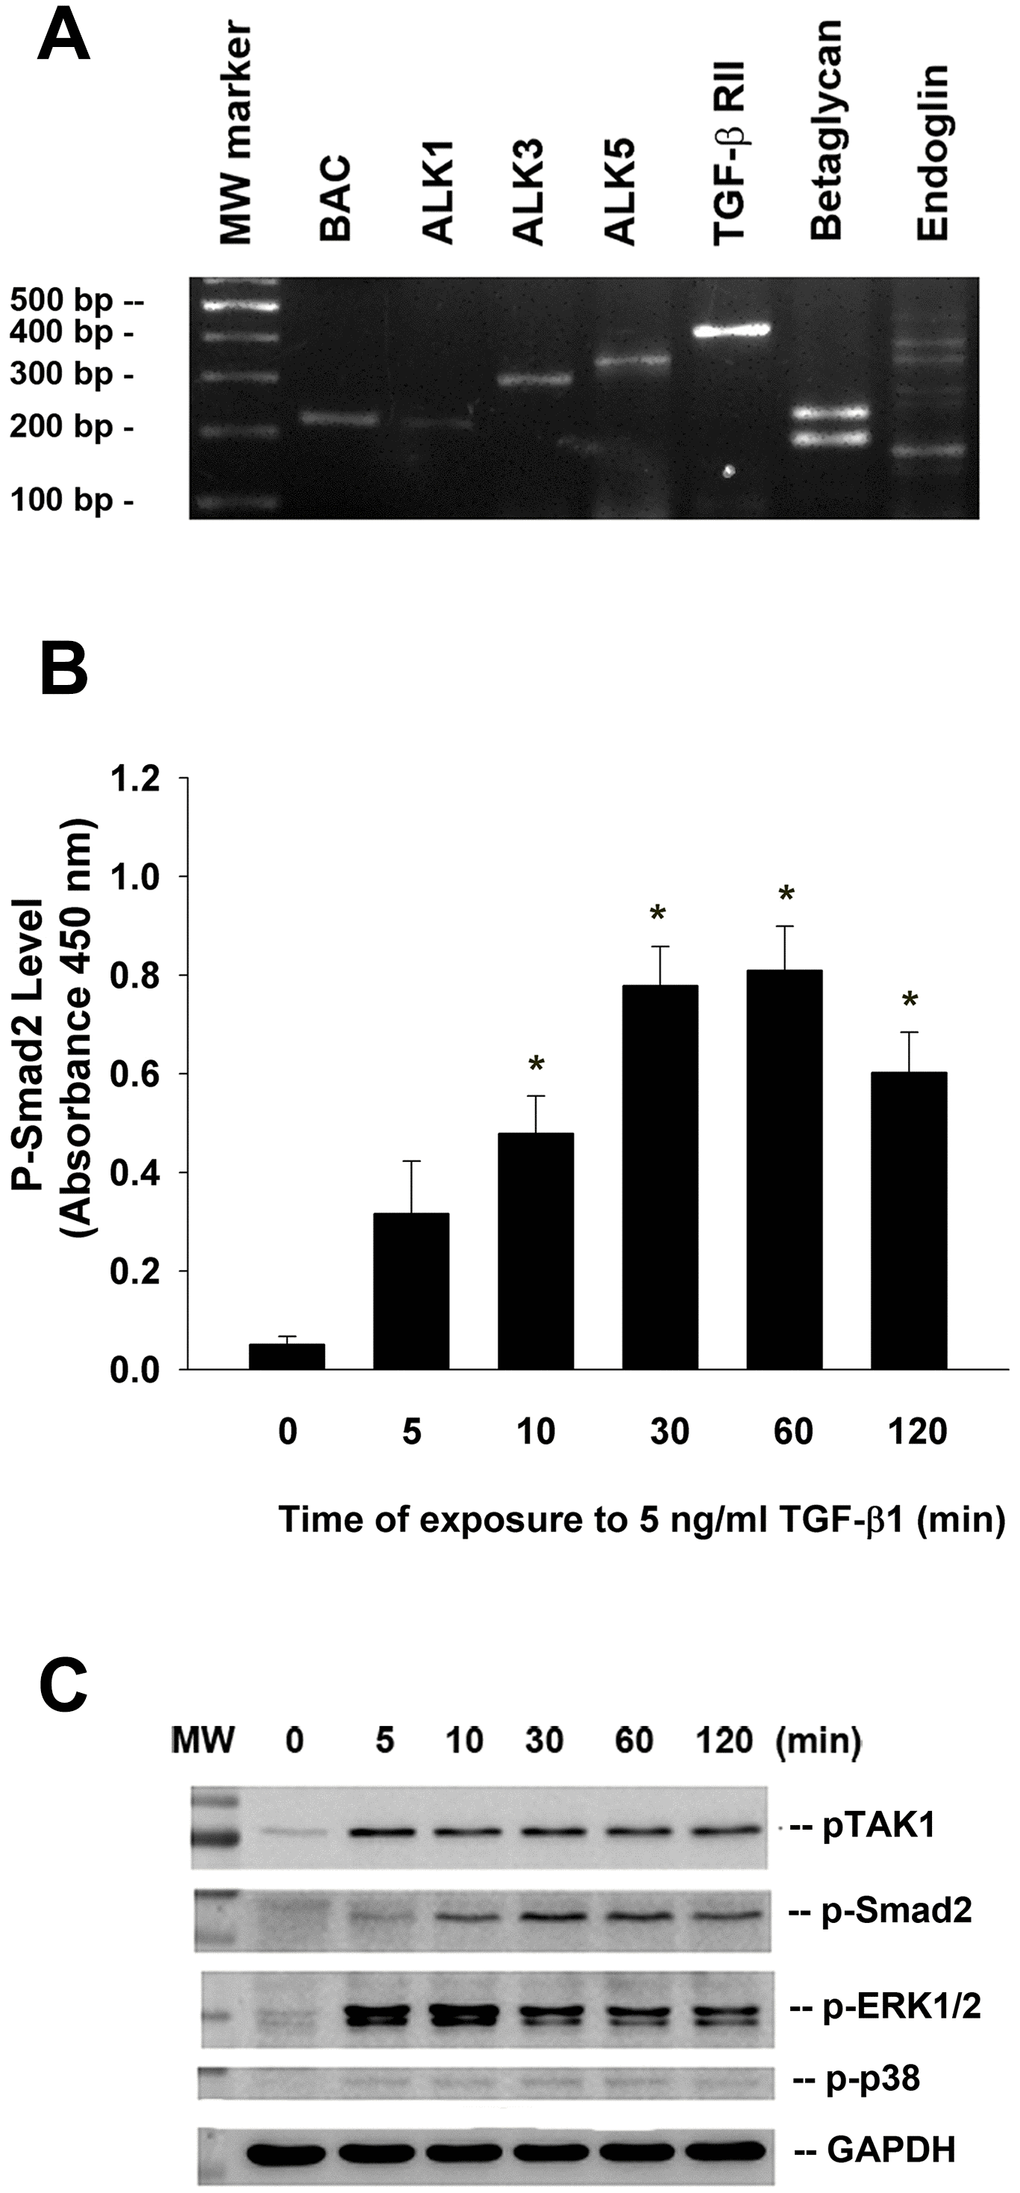 Expression of various TGF-β related receptors in SHED and the effect of TGF-β1 on the Smad2, TAK1, ERK1/2 and p38 phosphorylation of SHED. (A) SHED cells were cultured in DMEM with 10%FBS for 24 hours. Total RNA was isolated for RT-PCR analysis of TGF-β related receptors (ALK1, ALK3, ALK5, TGF-β1RII, betaglycan, endoglin) expression, (B) SHED were exposed to TGF-β1 for 0-120 min (as indicated on graphs). Cell lysates were prepared and proteins were used for analysis of p-Smad2 expression by PathScan phospho-ELISA (OD450, Mean ± SE). *Denotes statistically significant difference when compared with control. (C) SHED were exposed to TGF-β1 for 0-120 min. Cell lysates were prepared and proteins were used for western blotting analysis of p-Smad2, p-TAK1, p-ERK1/2, p-p38 and GAPDH (control) protein expression. One representative western blotting picture was shown.